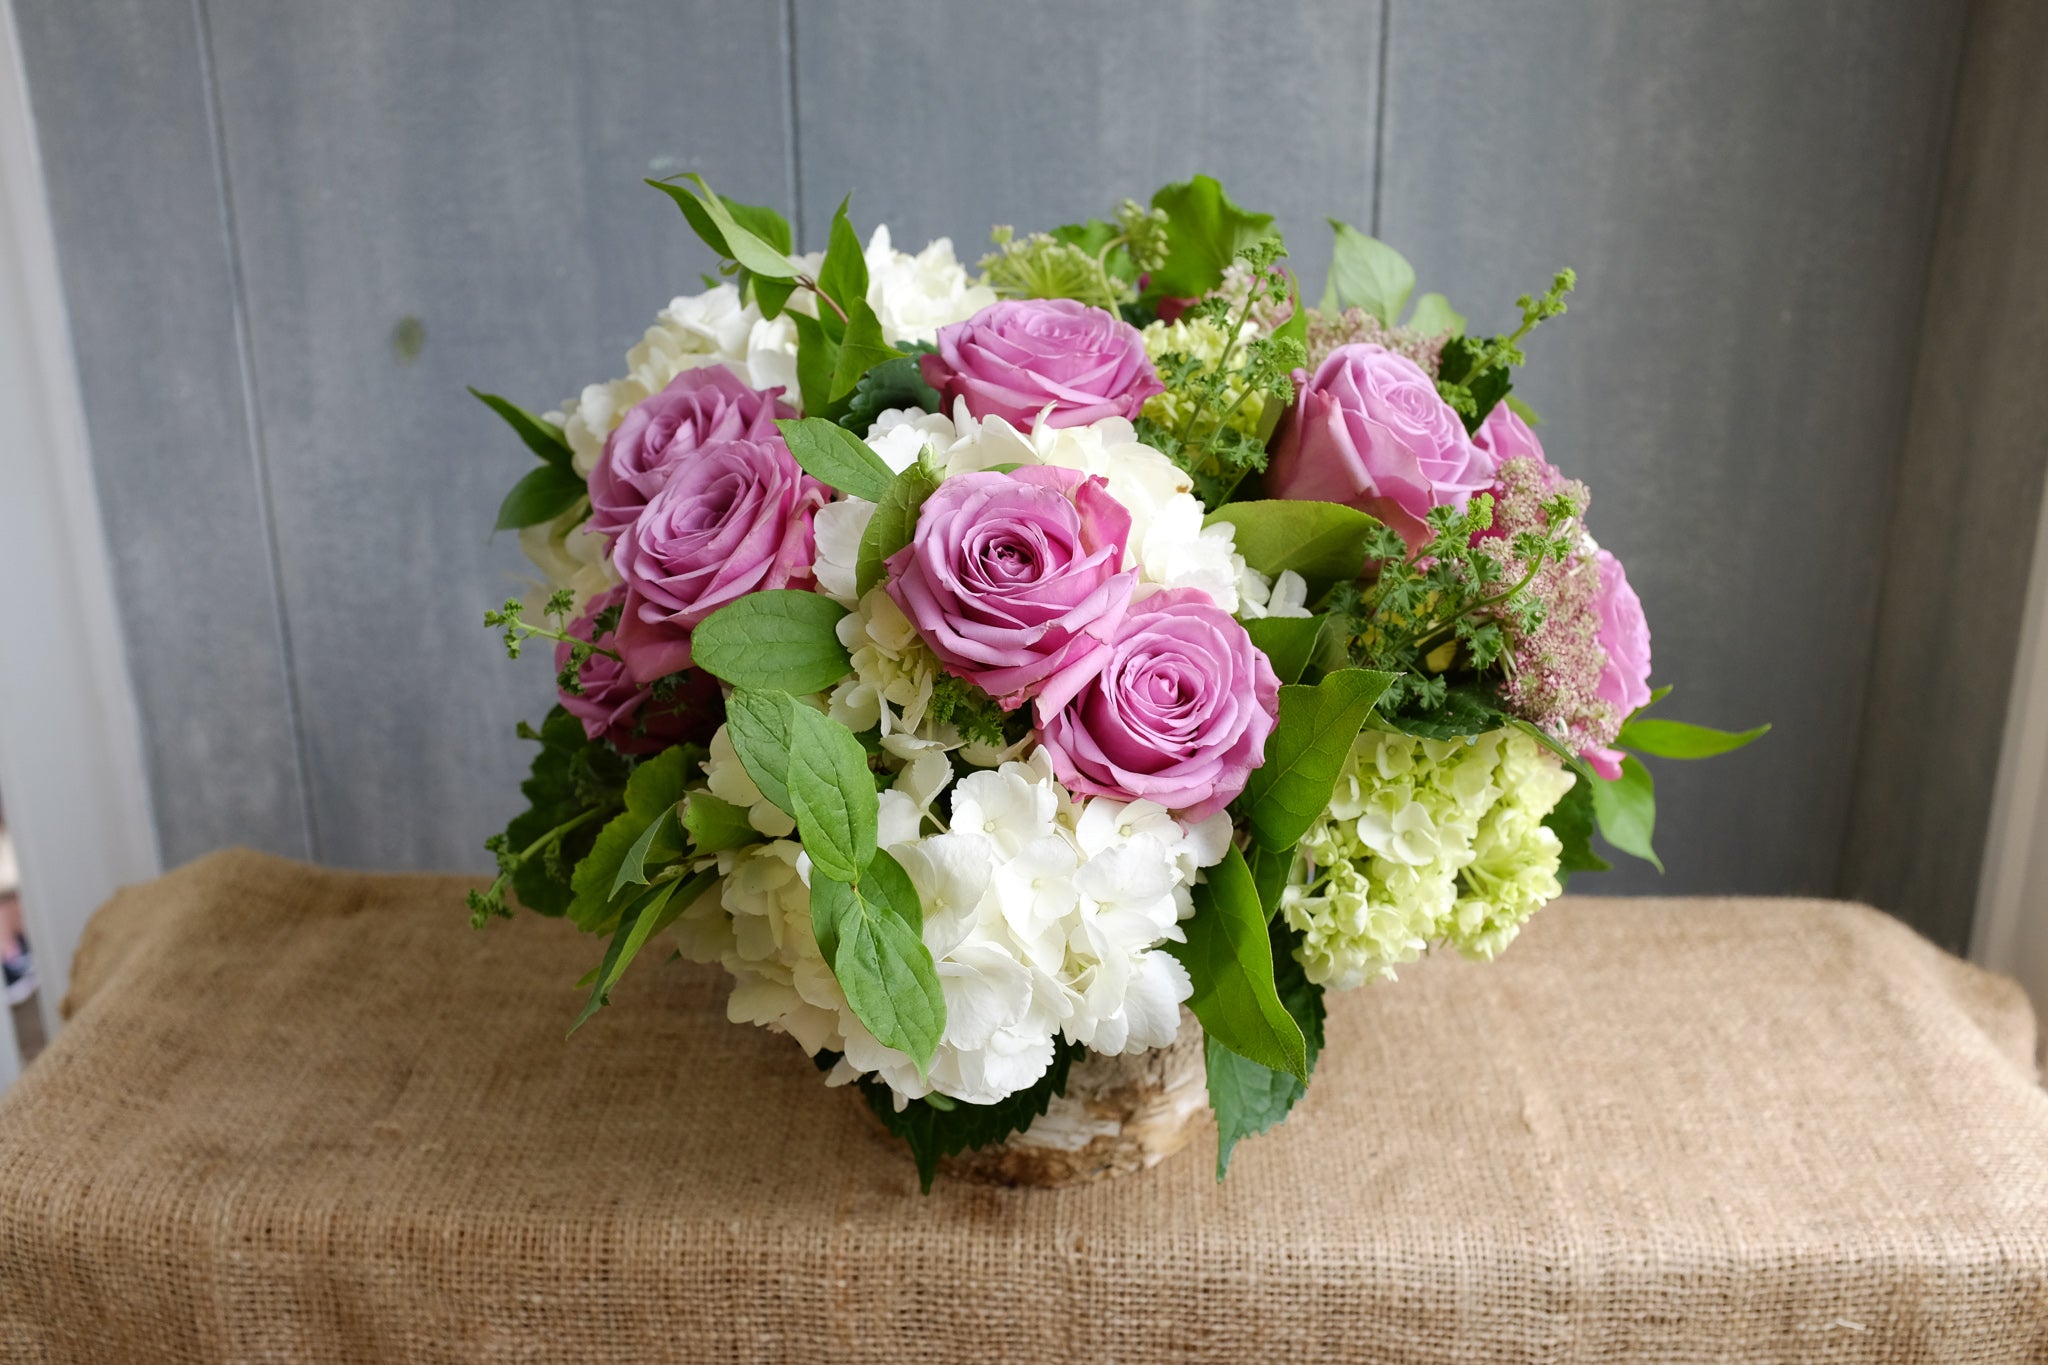 Floral Arrangement by Michler's Florist with pink roses and white hydrangeas